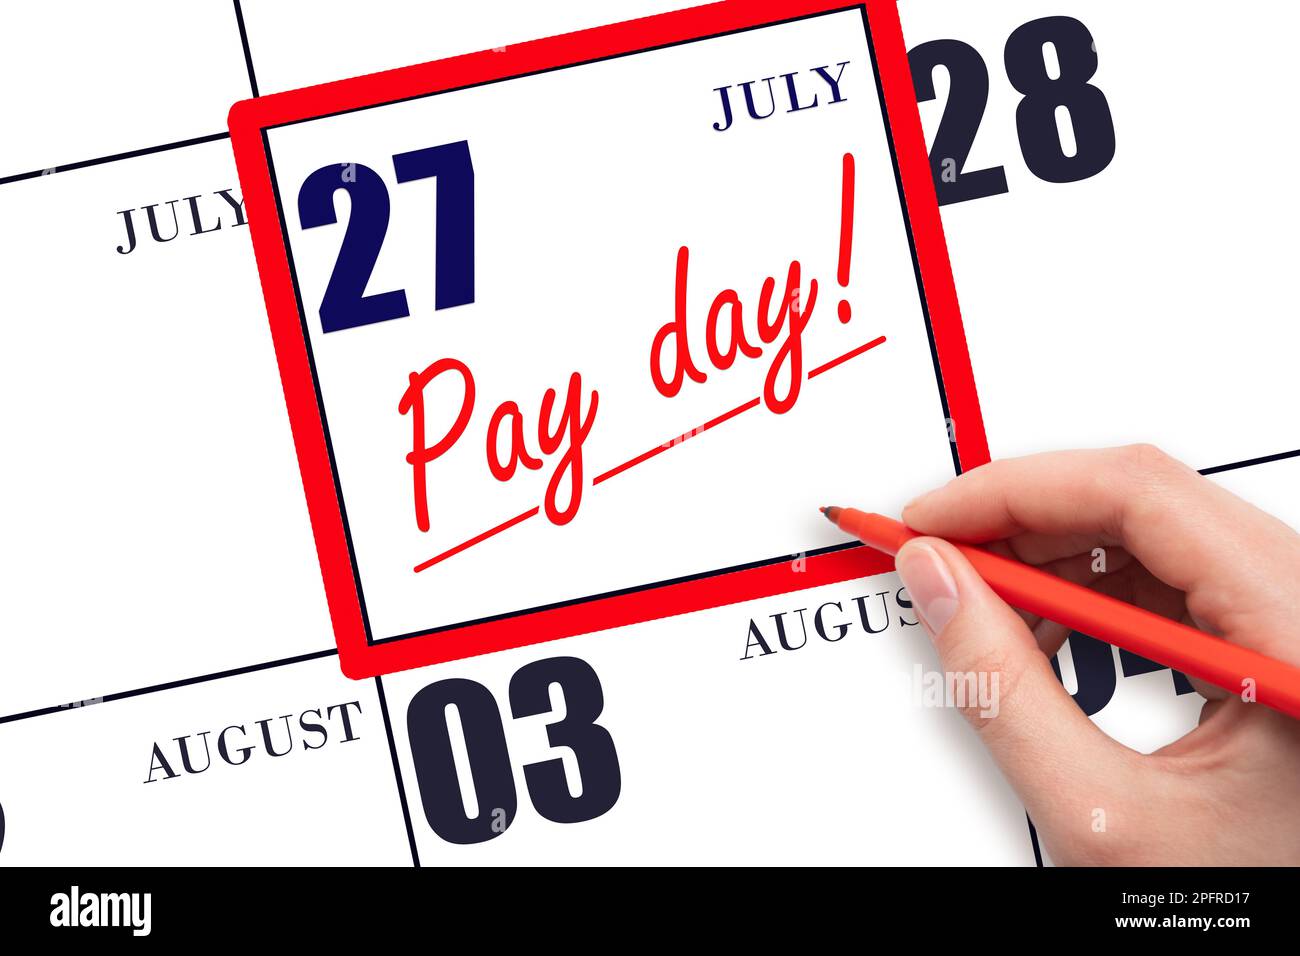 27th day of July. Hand writing text PAY DATE on calendar date July 27 and underline it. Payment due date.  Reminder concept of payment. Summer month, Stock Photo